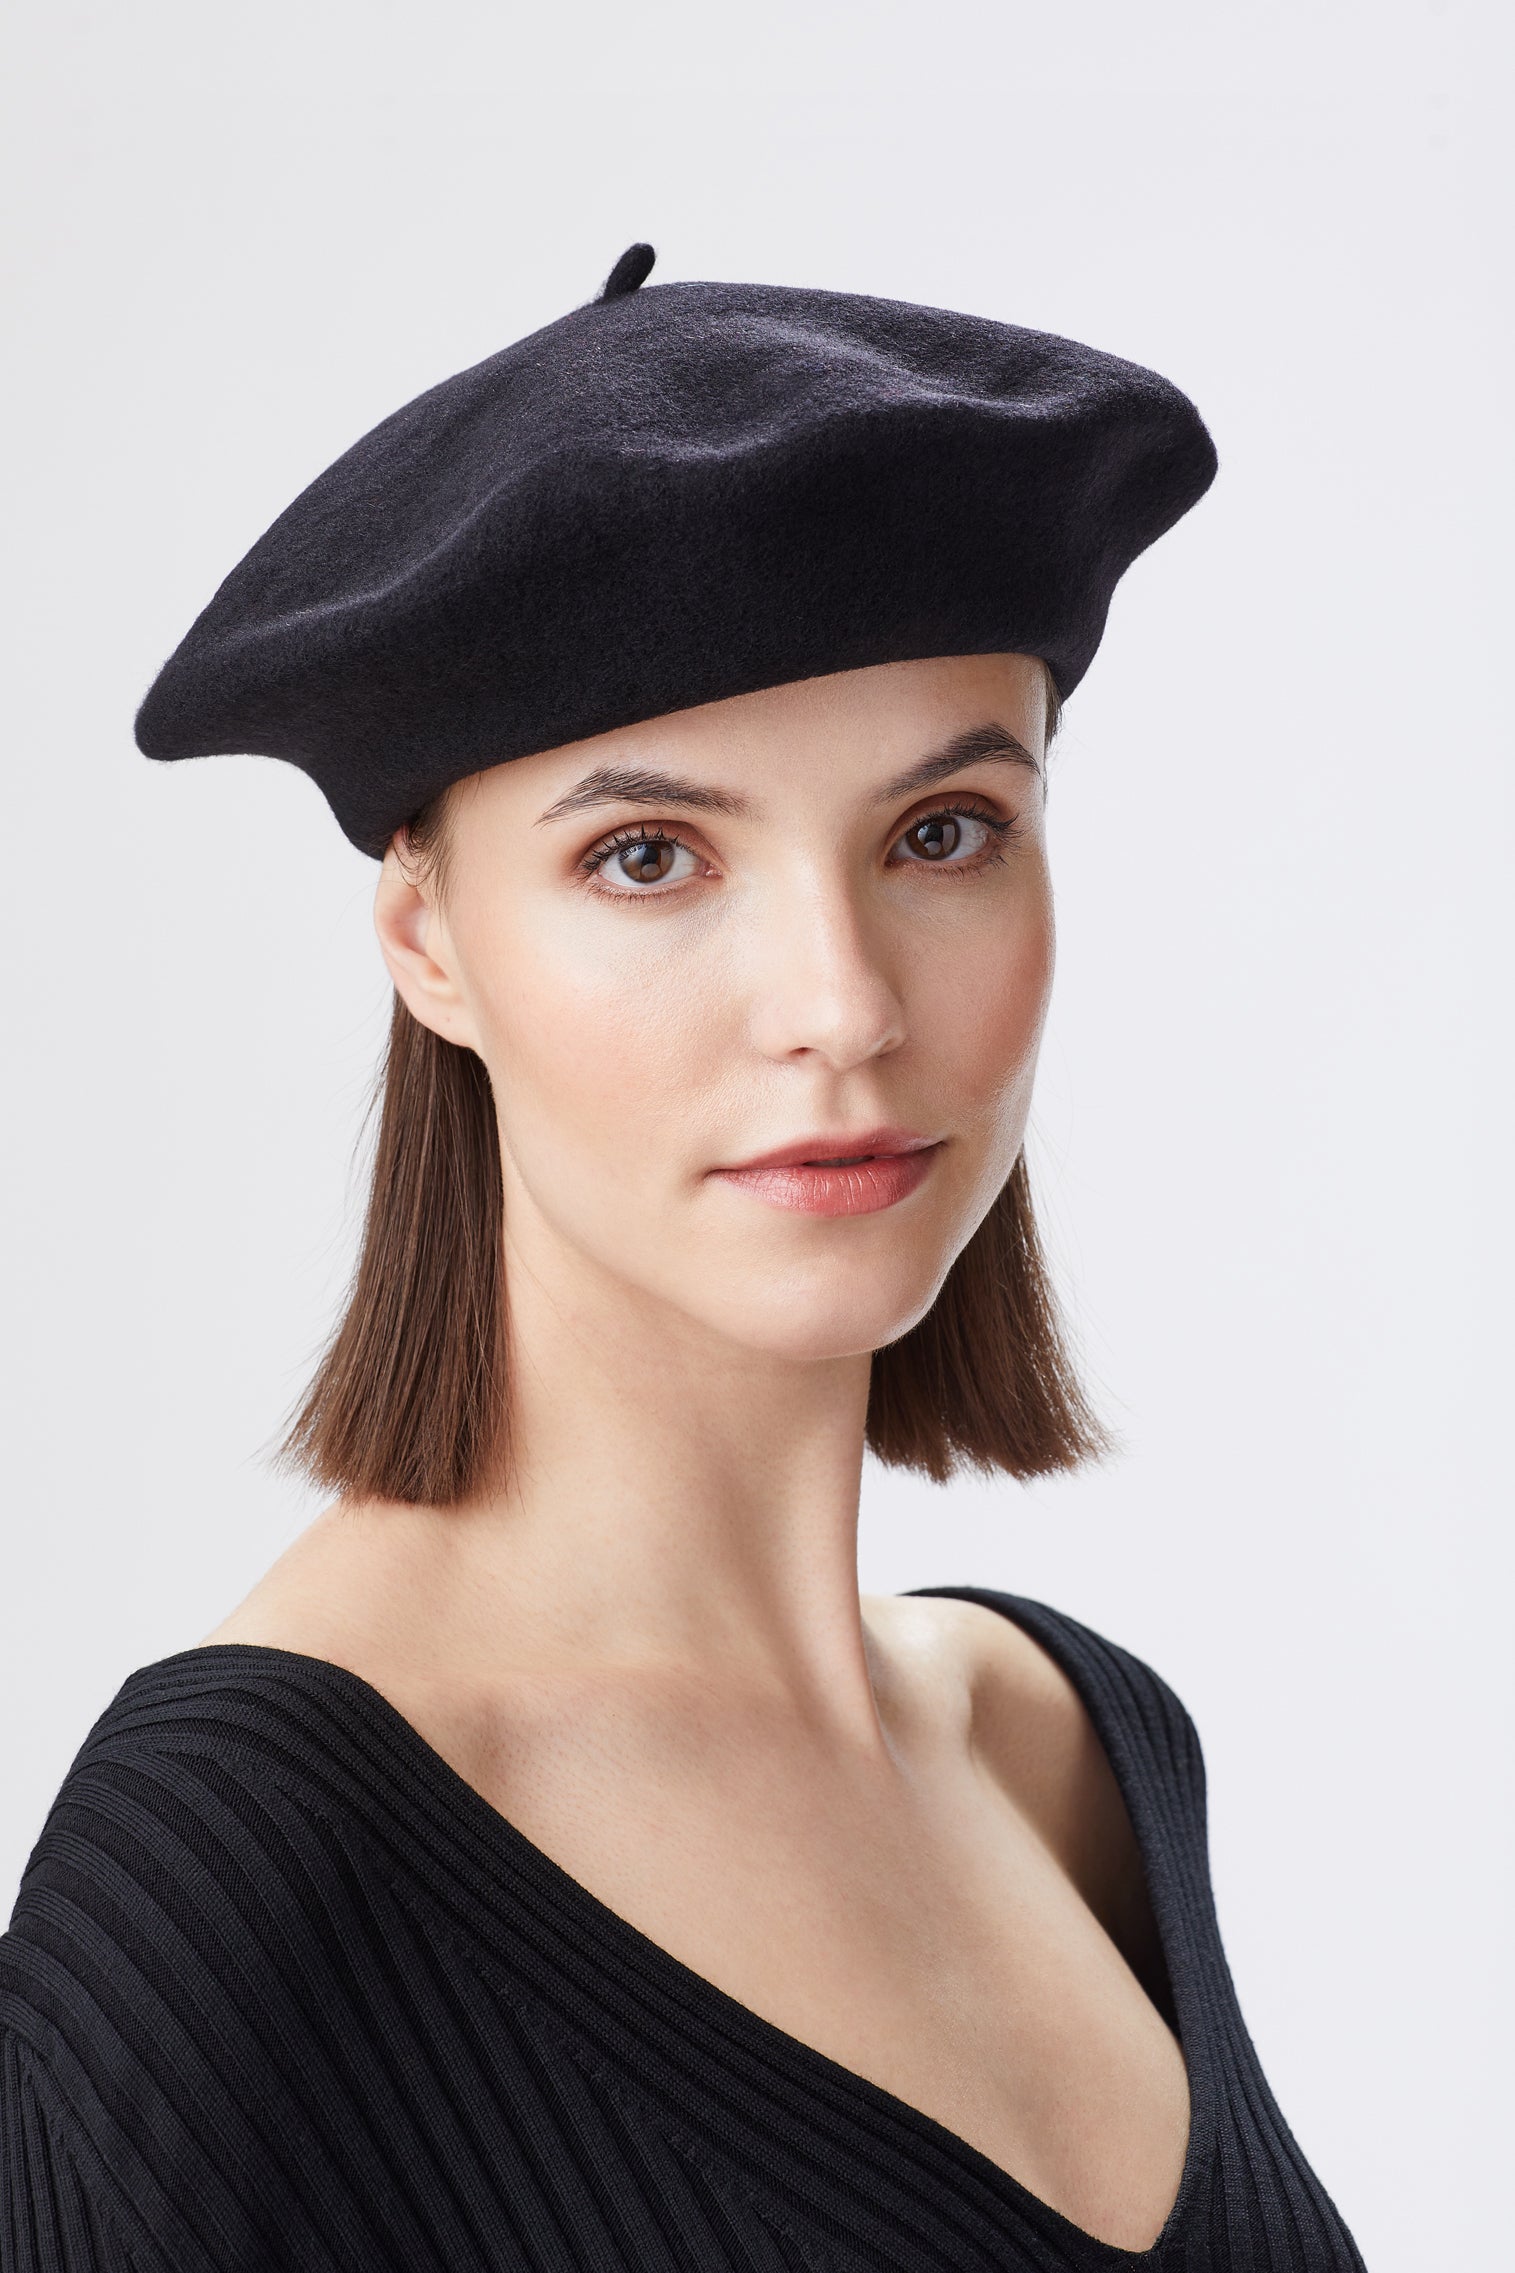 French Beret - Hats for Heart-shaped Face Shapes - Lock & Co. Hatters London UK